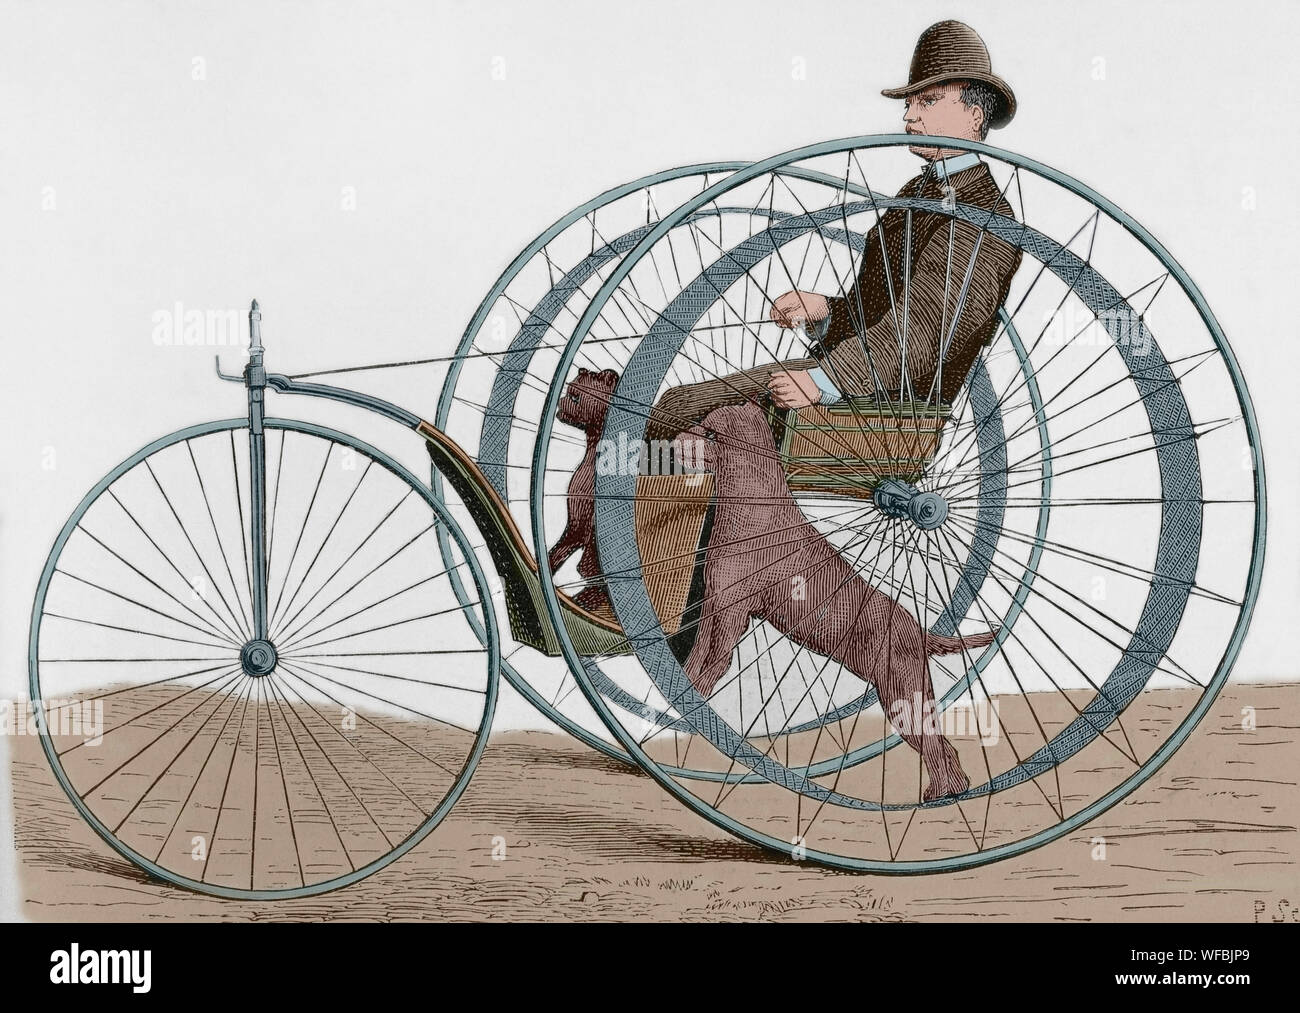 The 'Cynophere', or dog-powered velocipede. It was invented by the French mechanic M. Huret and patented on December 14, 1875. It consisted of a three-wheeled vehicle, a kind of tricycle, weighing 80 kilograms and was moved by two dogs placed on the inner wheels simulating walk . It reached a speed of 10 kilometers per hour. Two vehicles were presented at the Universal Exhibition at Philadelphia (Pennsylvania, United States) in 1876. Engraving. La Ilustracion Española y Americana, June 15, 1876. Later colouration. Stock Photo